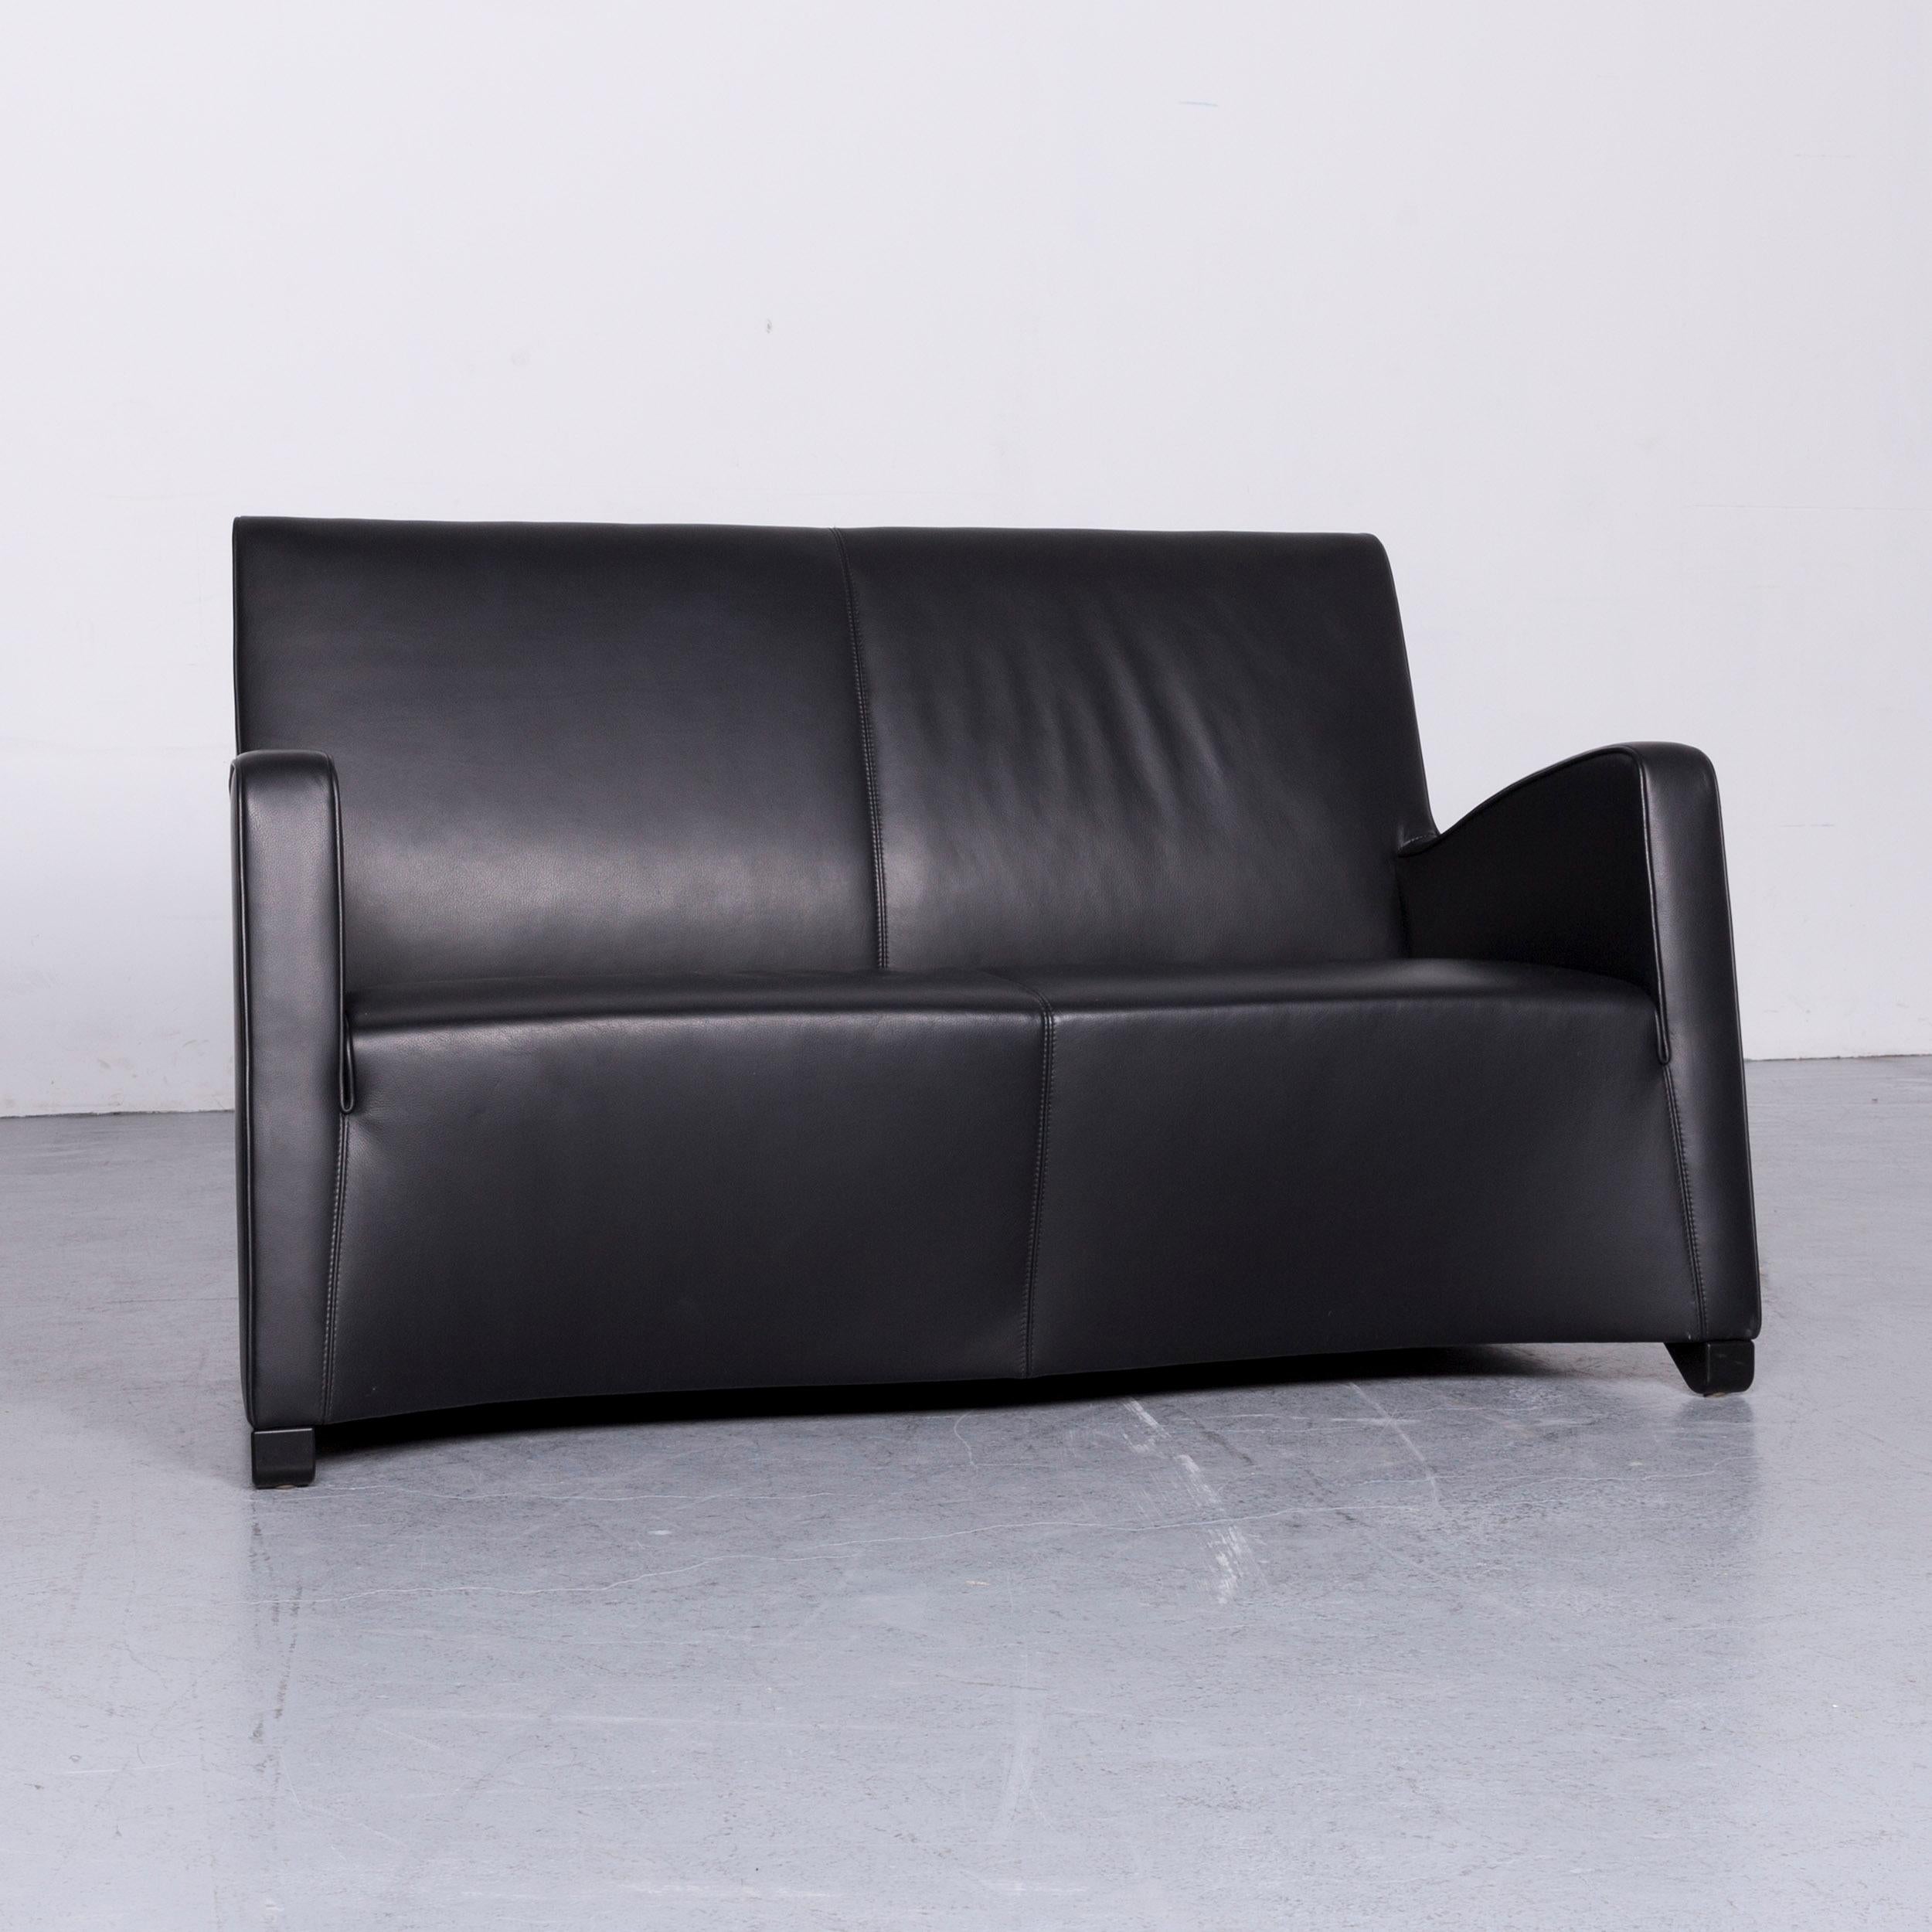 We bring to you a Wittmann Duke designer leather sofa black two-seat couch.